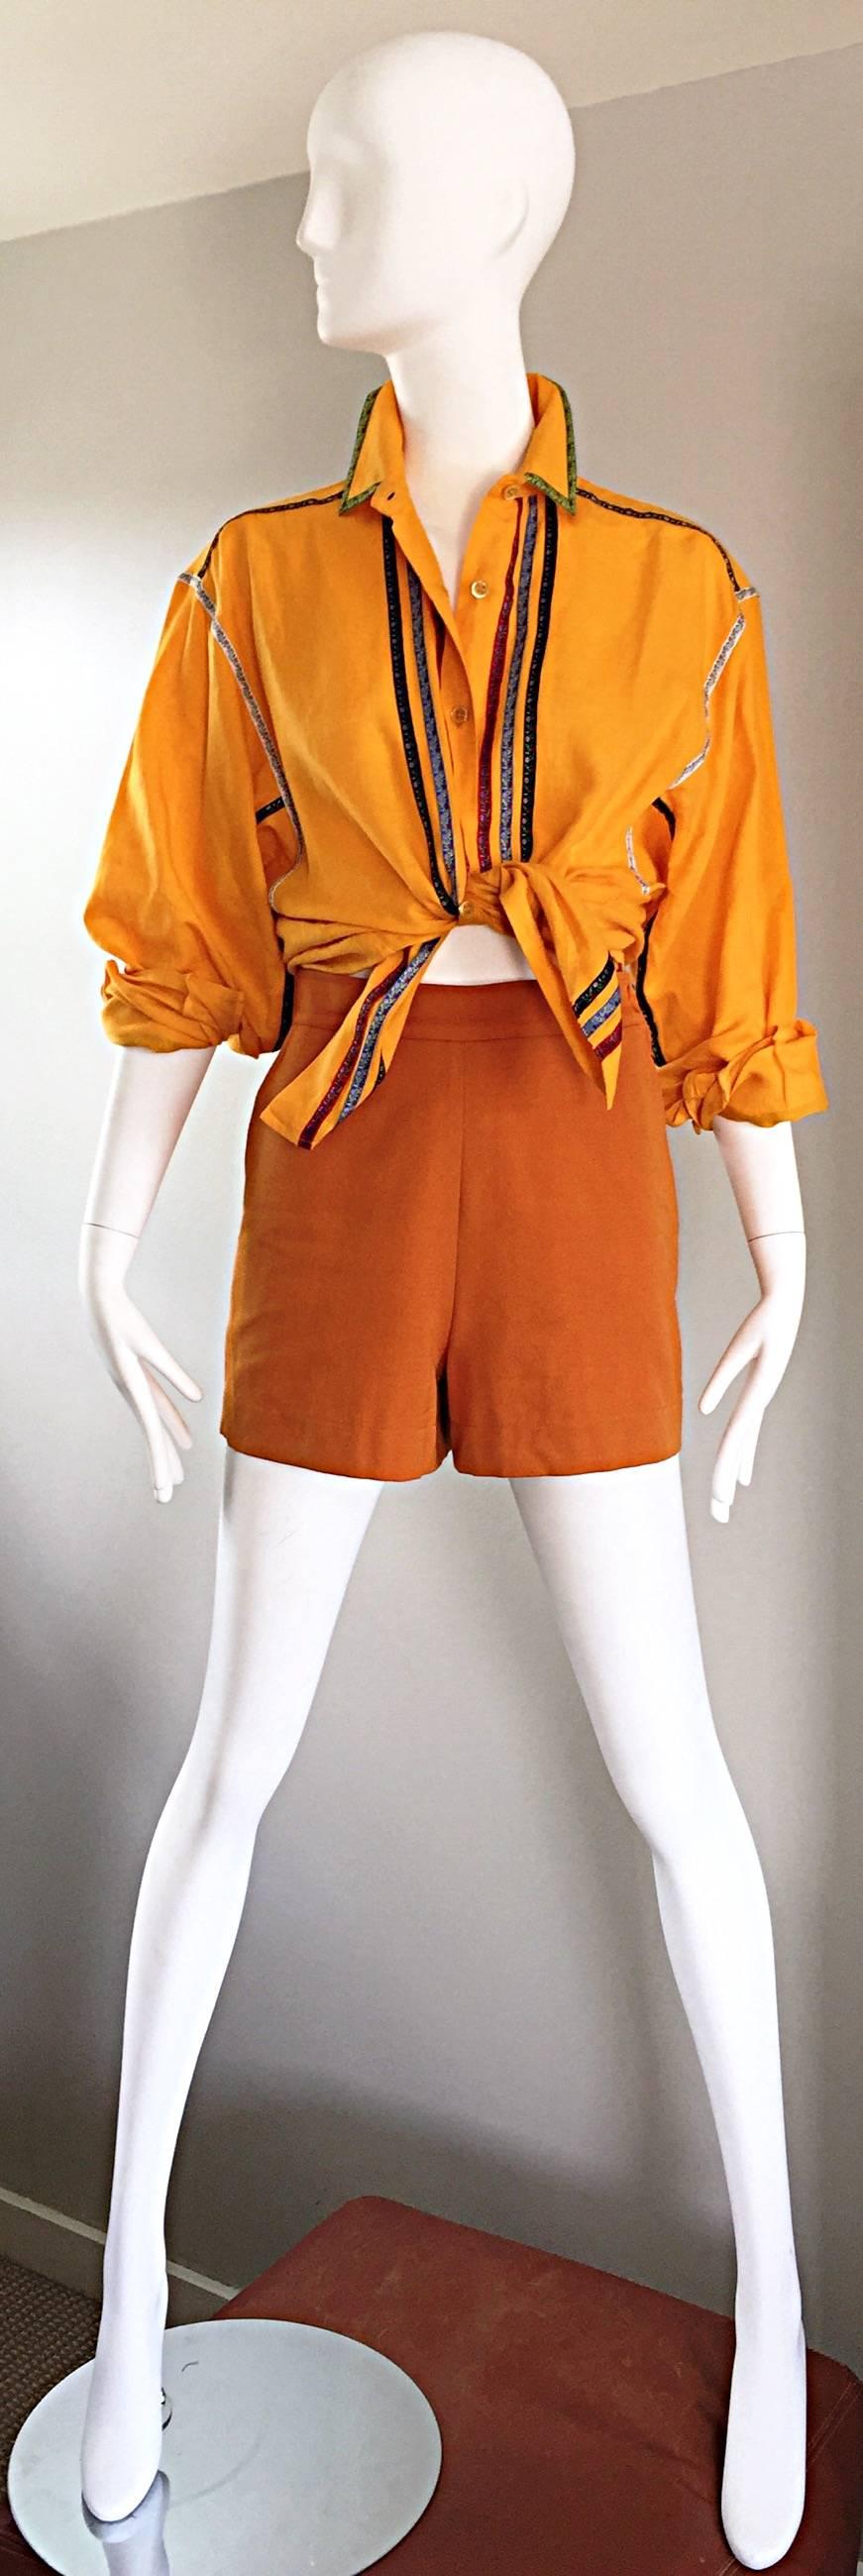 Super stylish vintage ALBERTA FERRETTI terra cotta colored high waisted Virgin wool shorts! Flattering fit, with two pockets at each side of the waist. Hidden zipper up the side with button closure. Great all year round. Lightweight wool that is